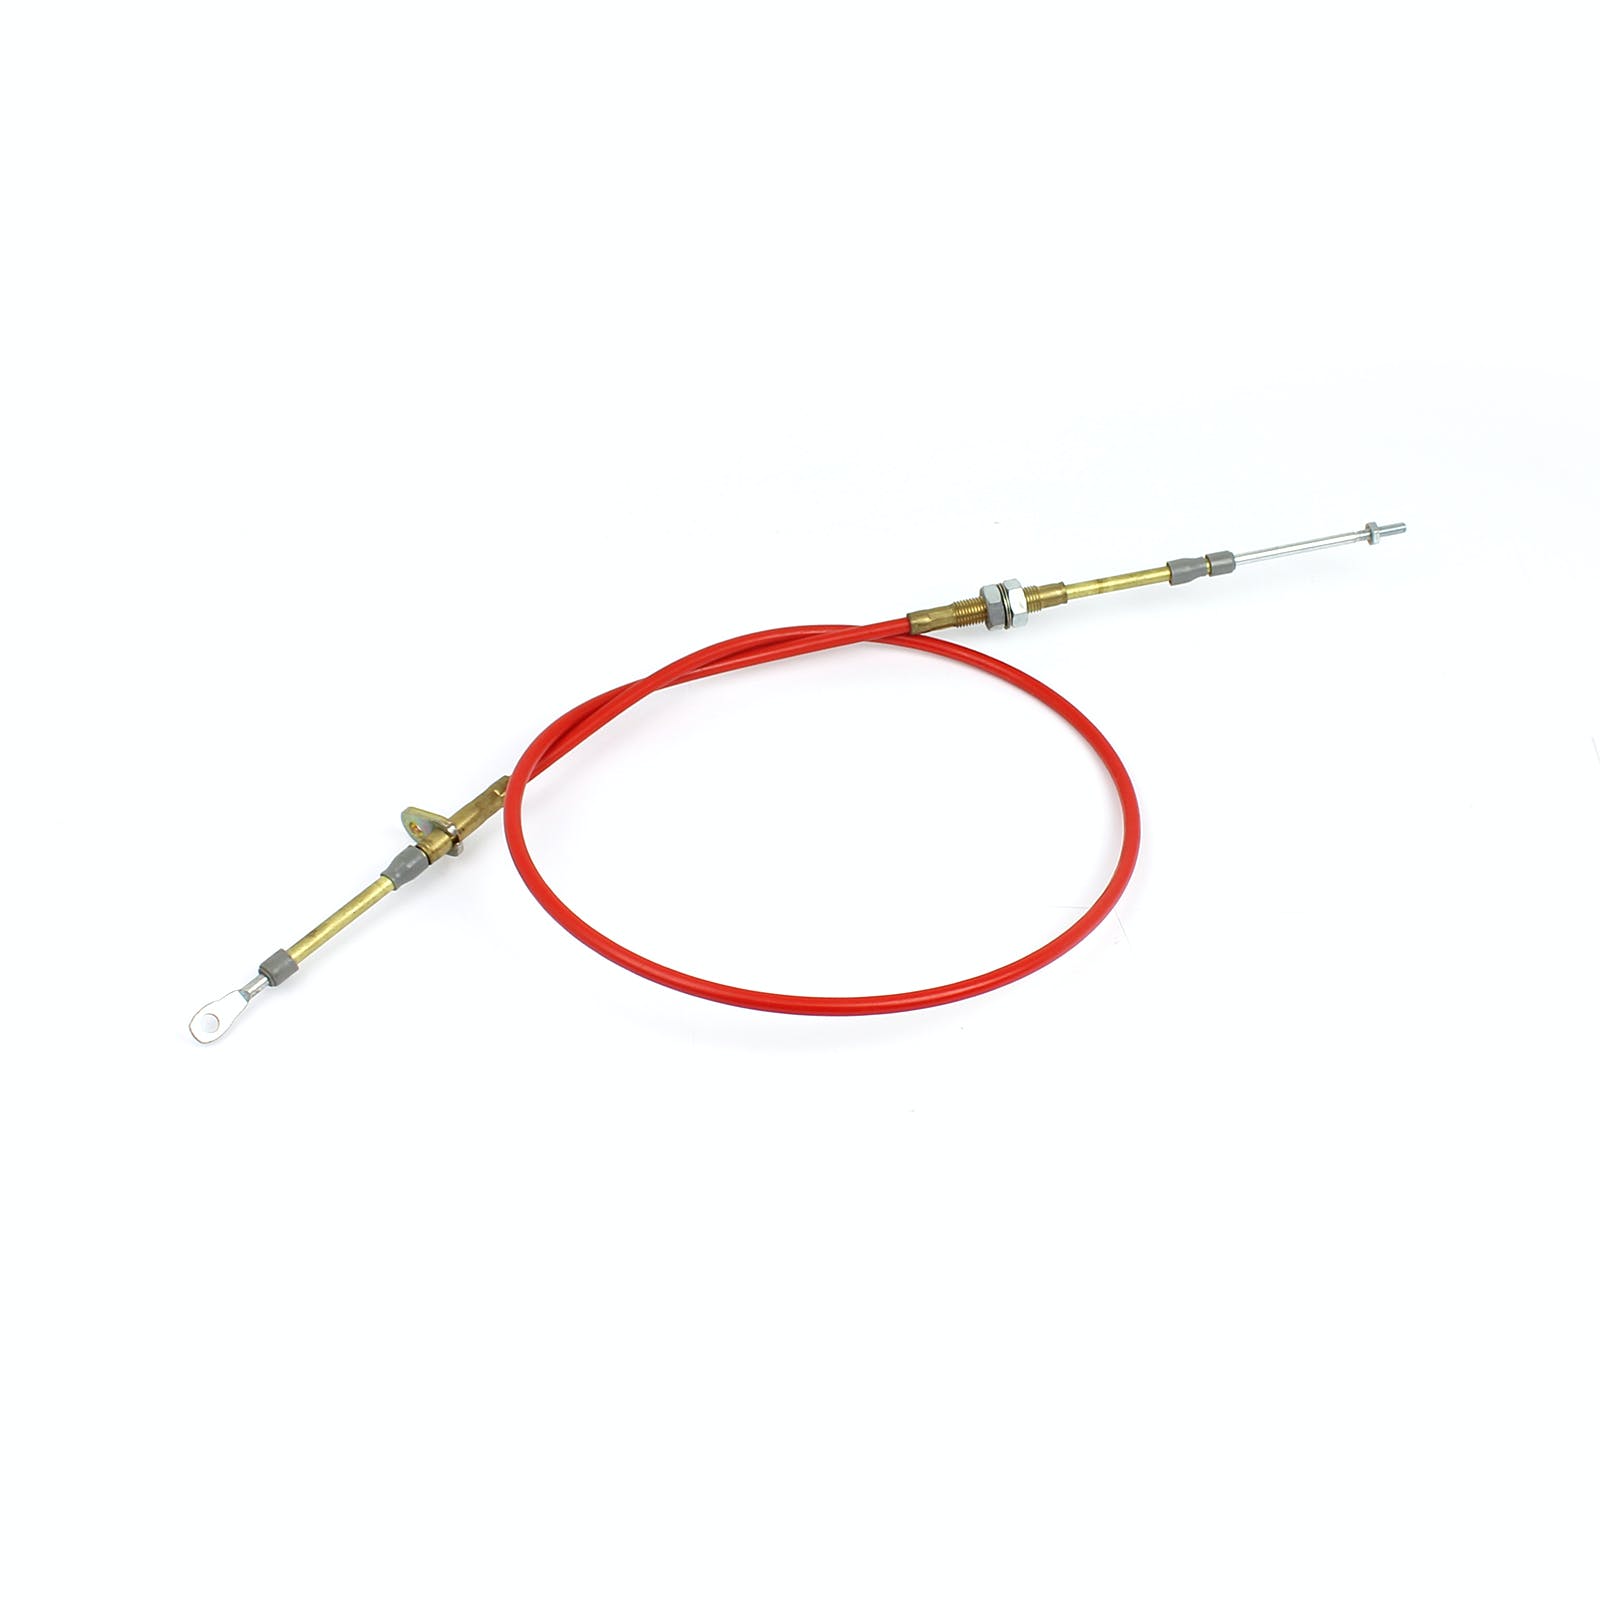 Speedmaster PCE219.1001 4 Ft. Length Shifter Cable Eyelet Threaded Morse Style - Suits B and M